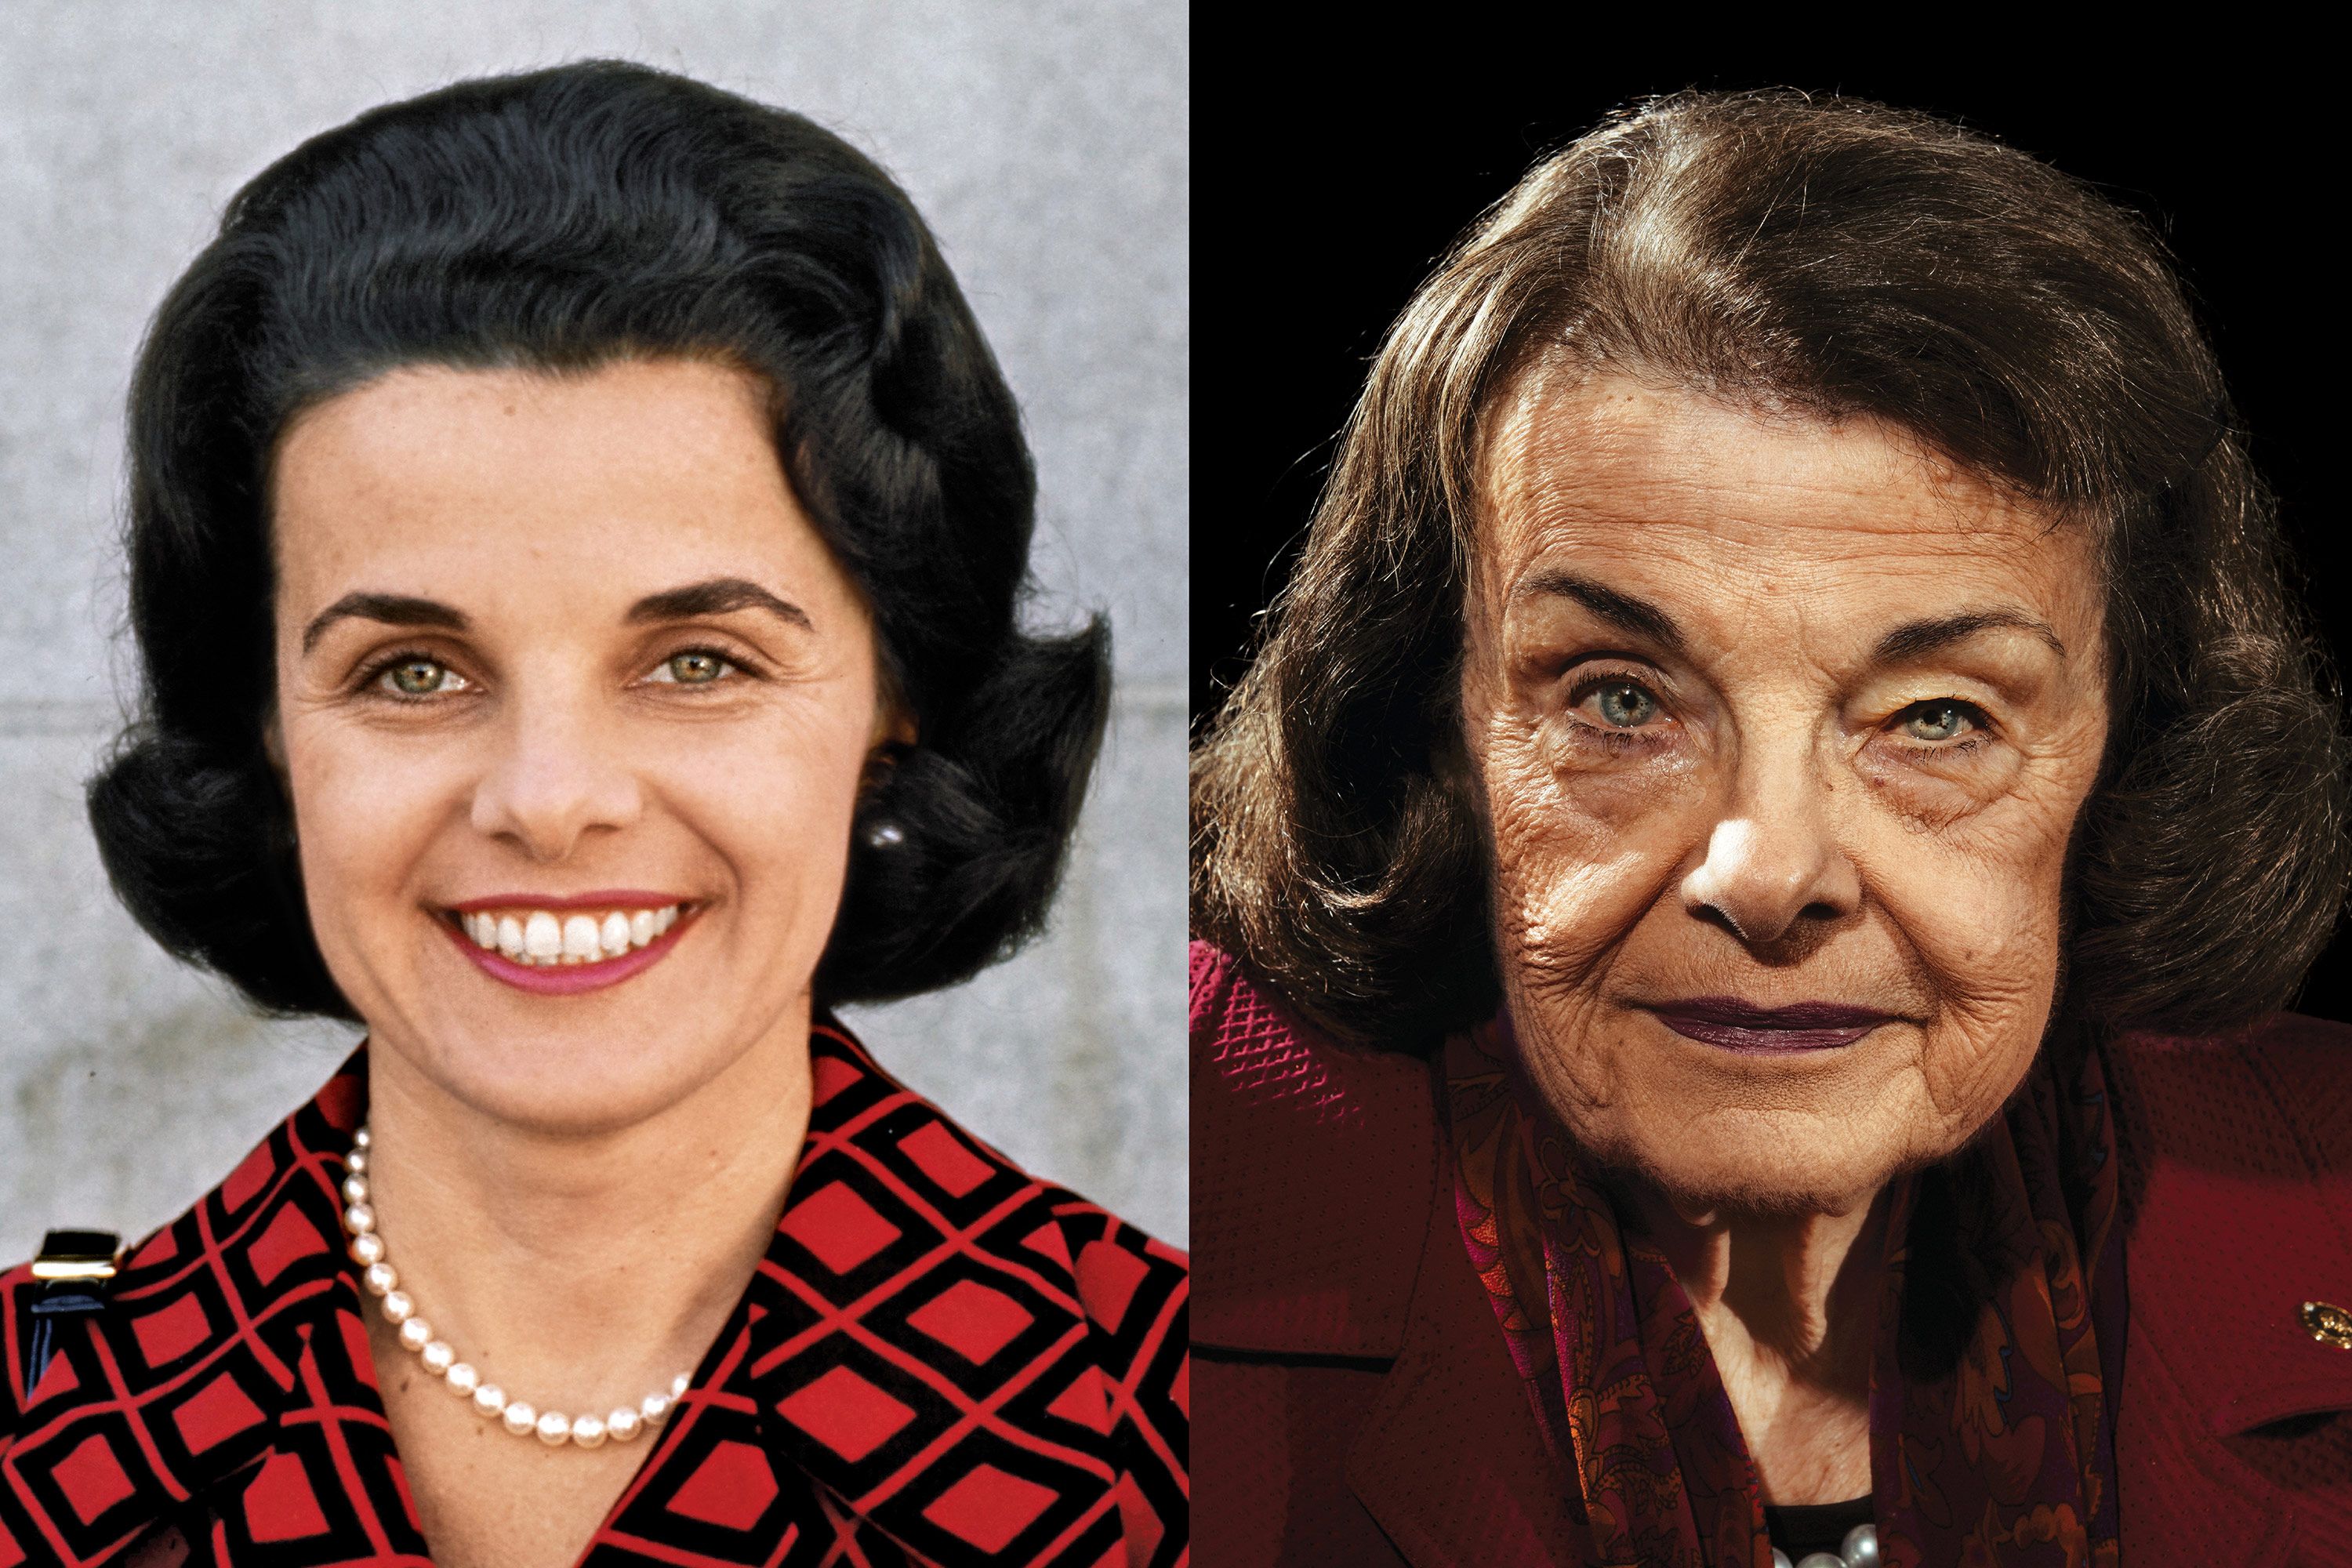 Sweet Russian Teen Old Dick - Dianne Feinstein's Long Fight for Abortion and Gun Control